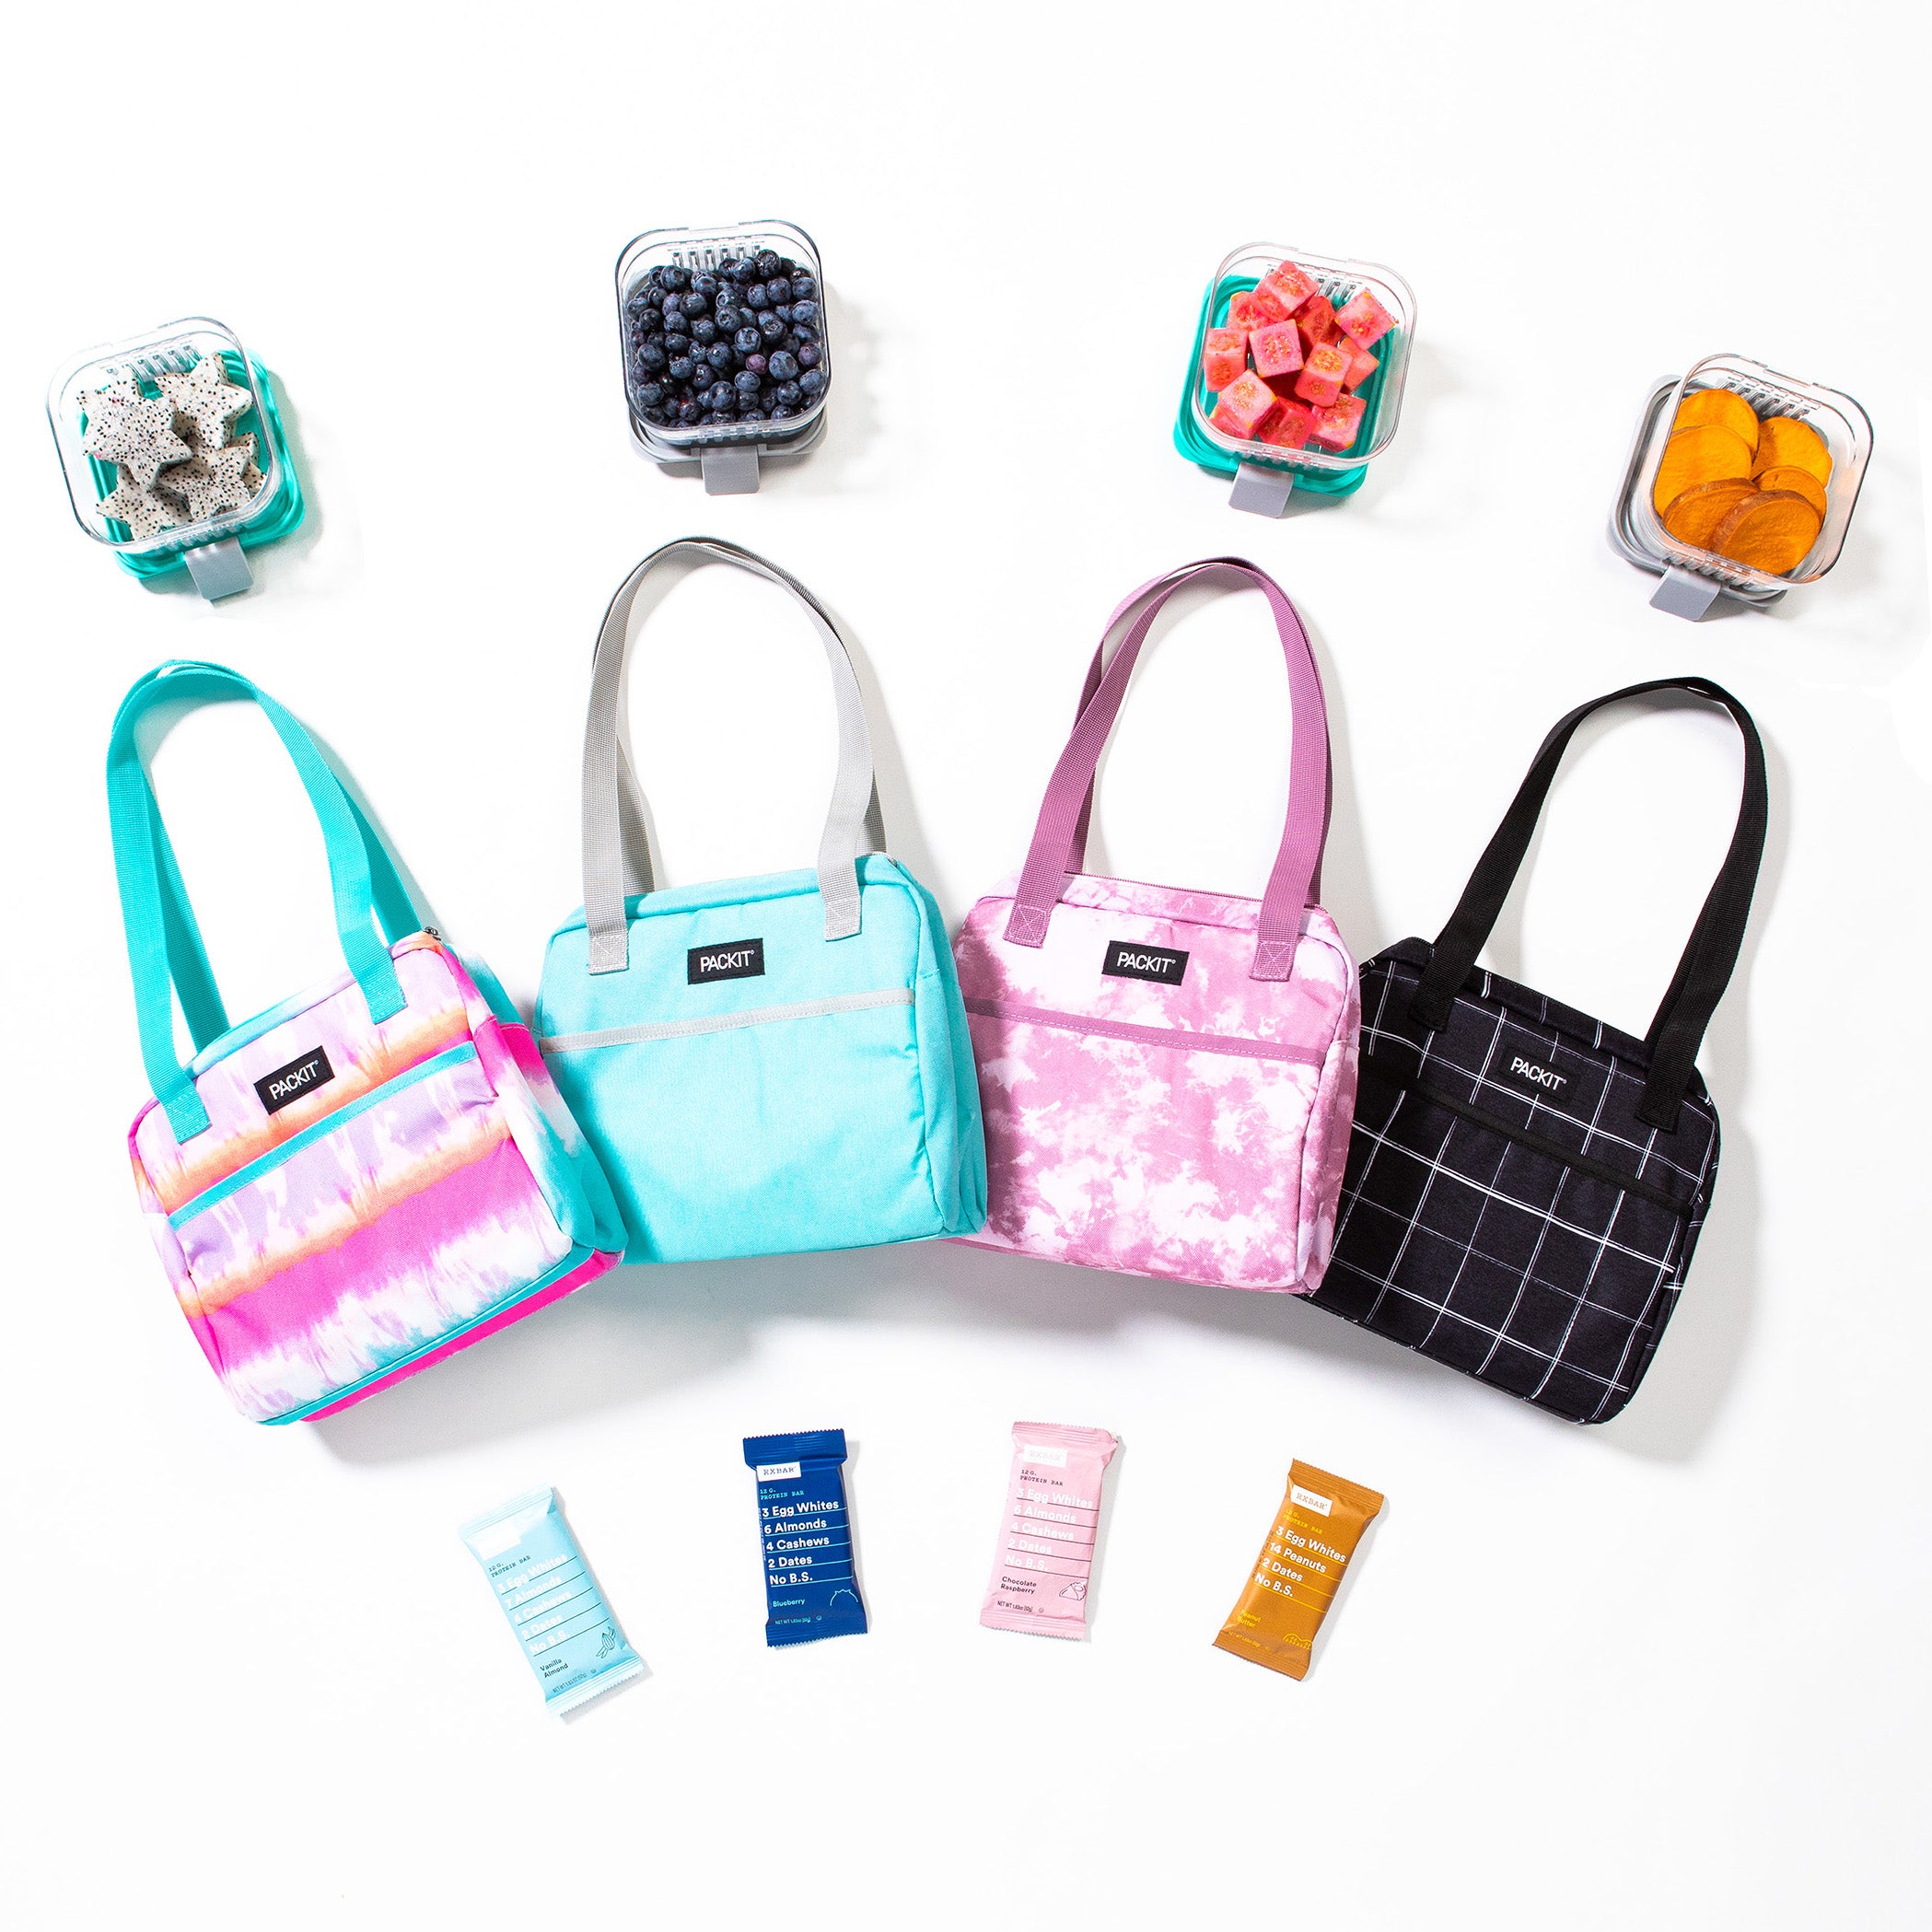 Purse-Style Lunch Bags